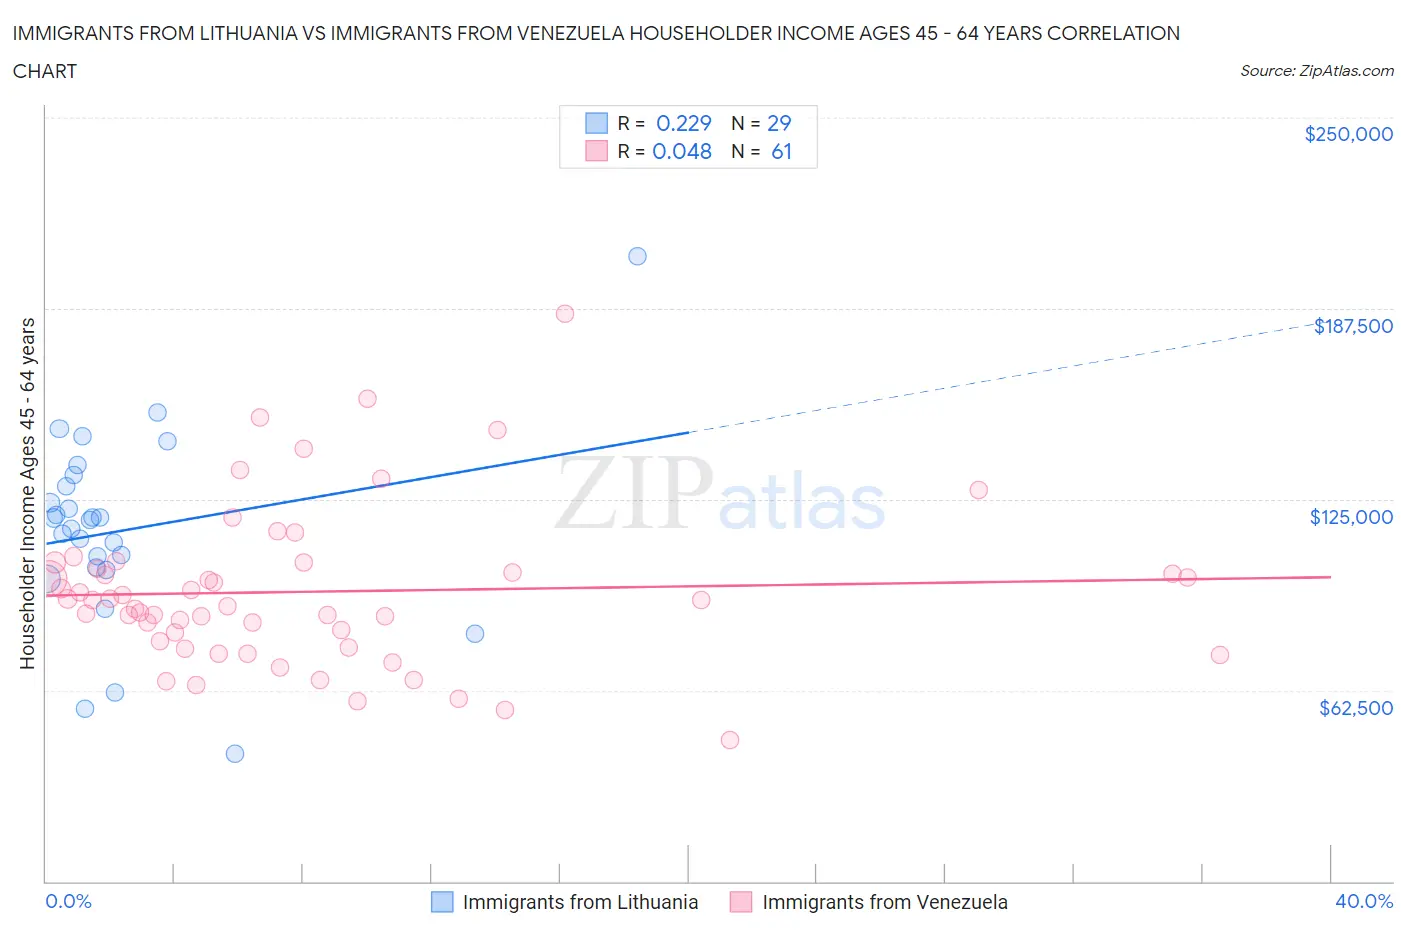 Immigrants from Lithuania vs Immigrants from Venezuela Householder Income Ages 45 - 64 years